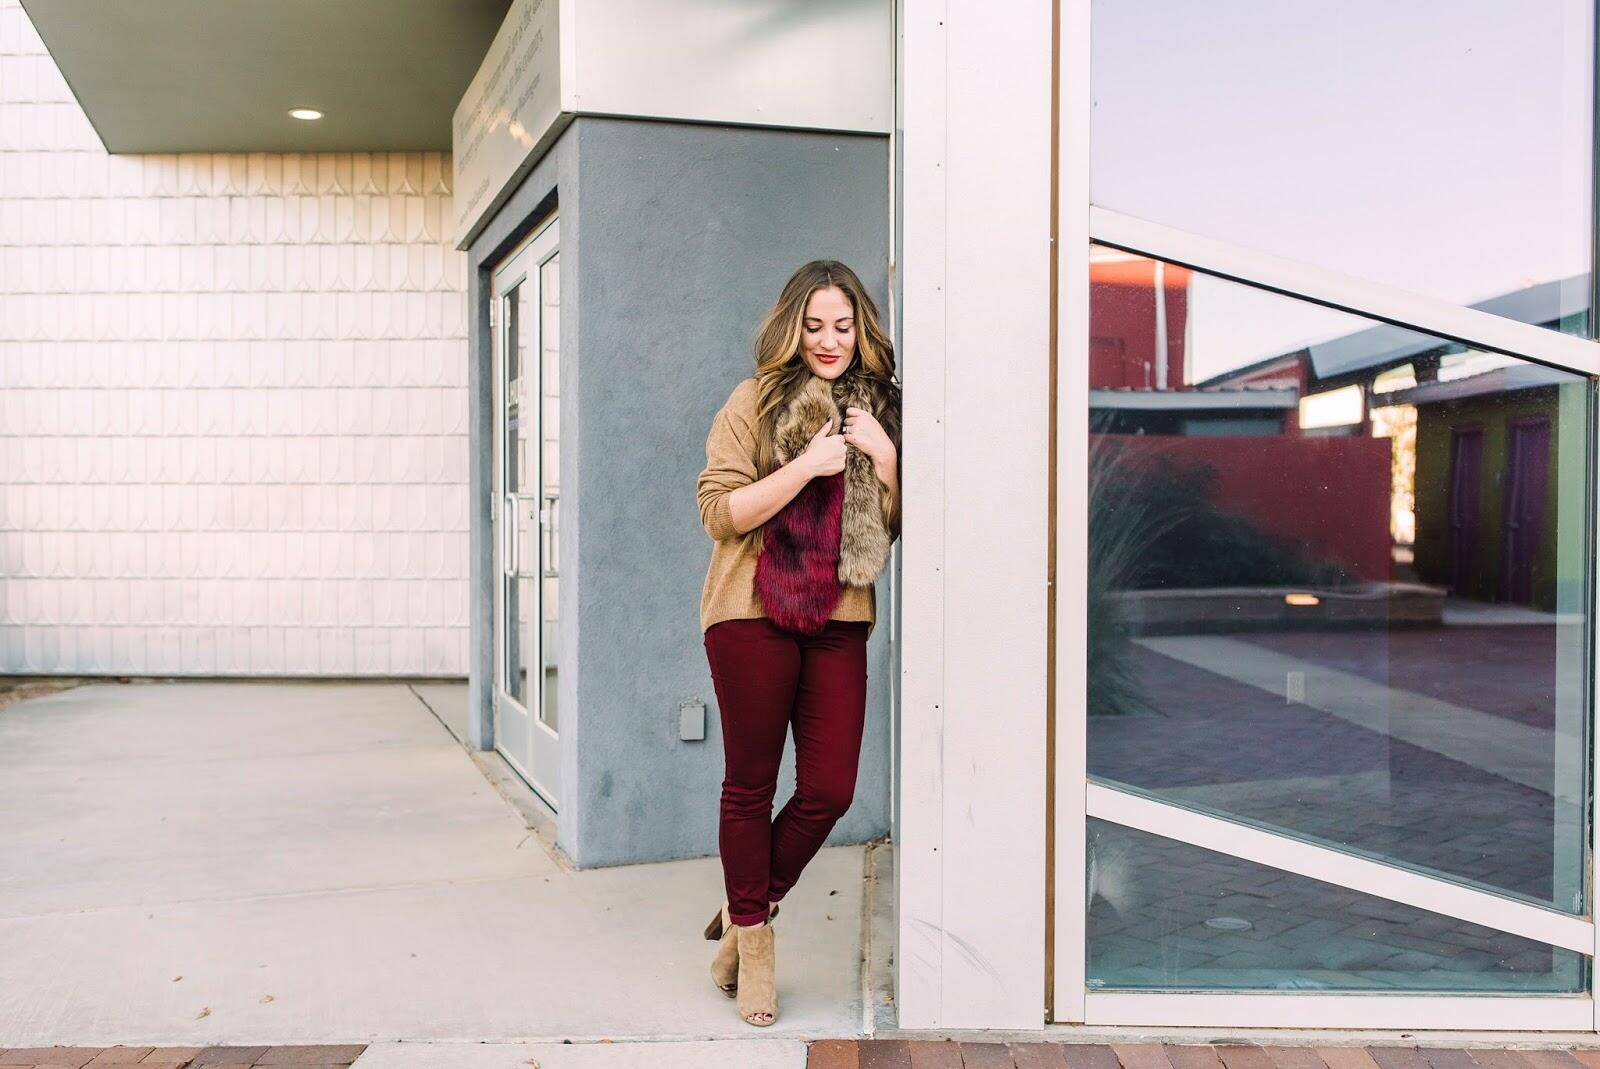 How to Wear Colored Jeans This Fall by East Memphis fashion blogger Walking in Memphis in High Heels